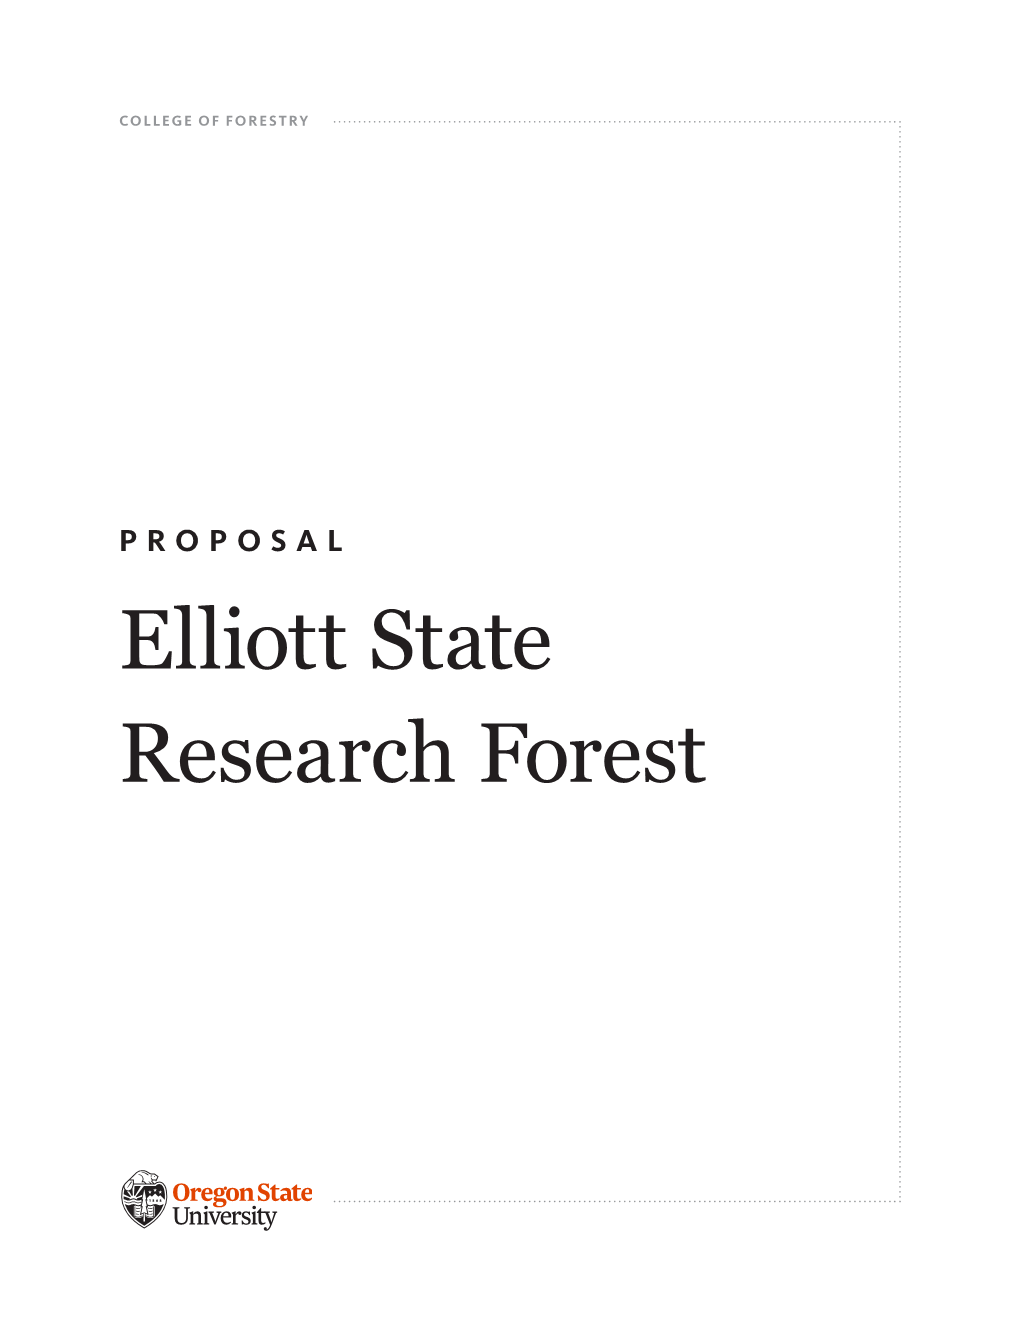 Elliott State Research Forest Proposal